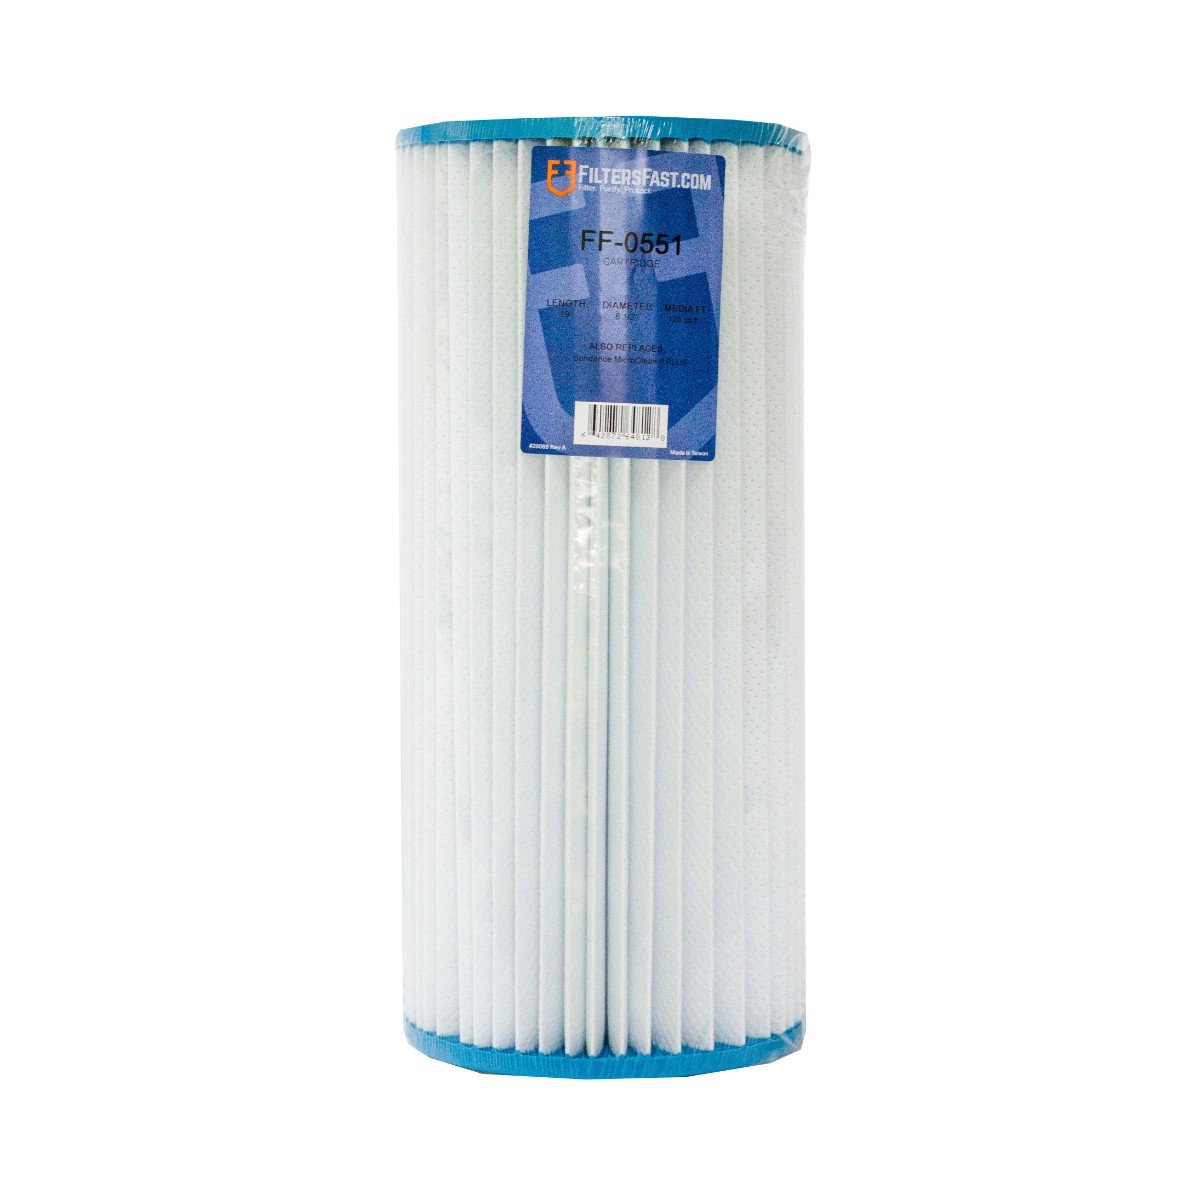 Filters Fast&reg; FF-0551 Replacement for Sundance&reg; Spa 6540-507